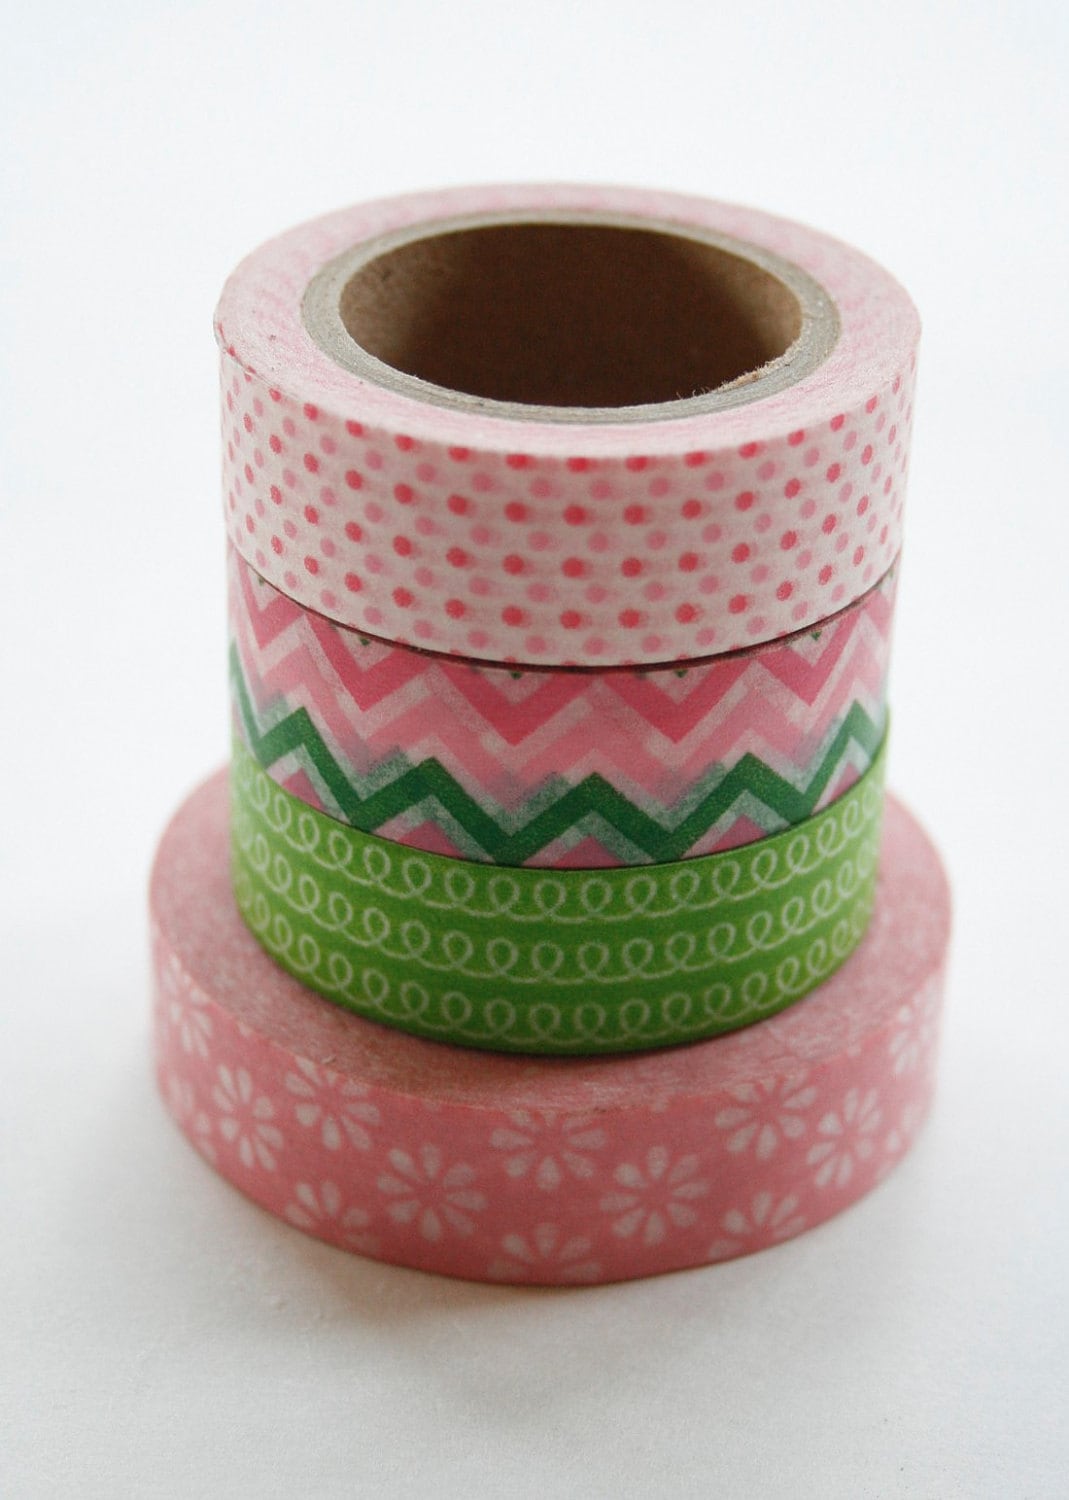 Washi Tape Set - 15mm - Combination AY - Green and Pink - Four Rolls Washi Tape